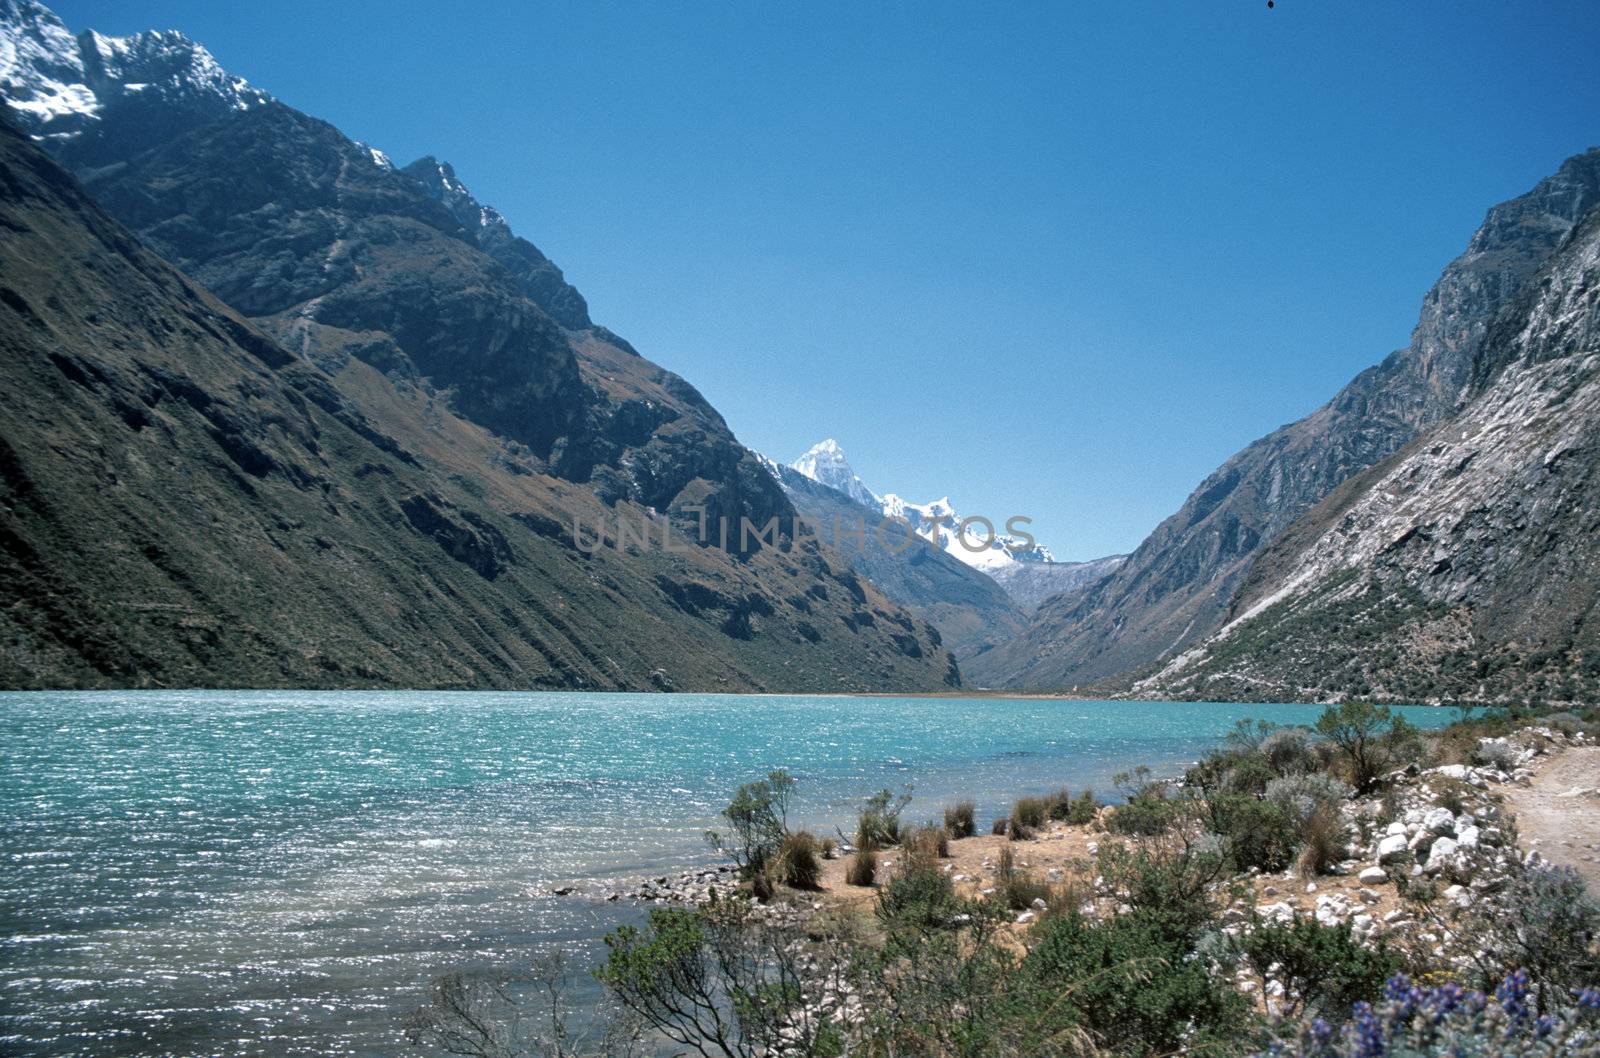 Stunning blue green lake deep within the Andes Mountains in Peru